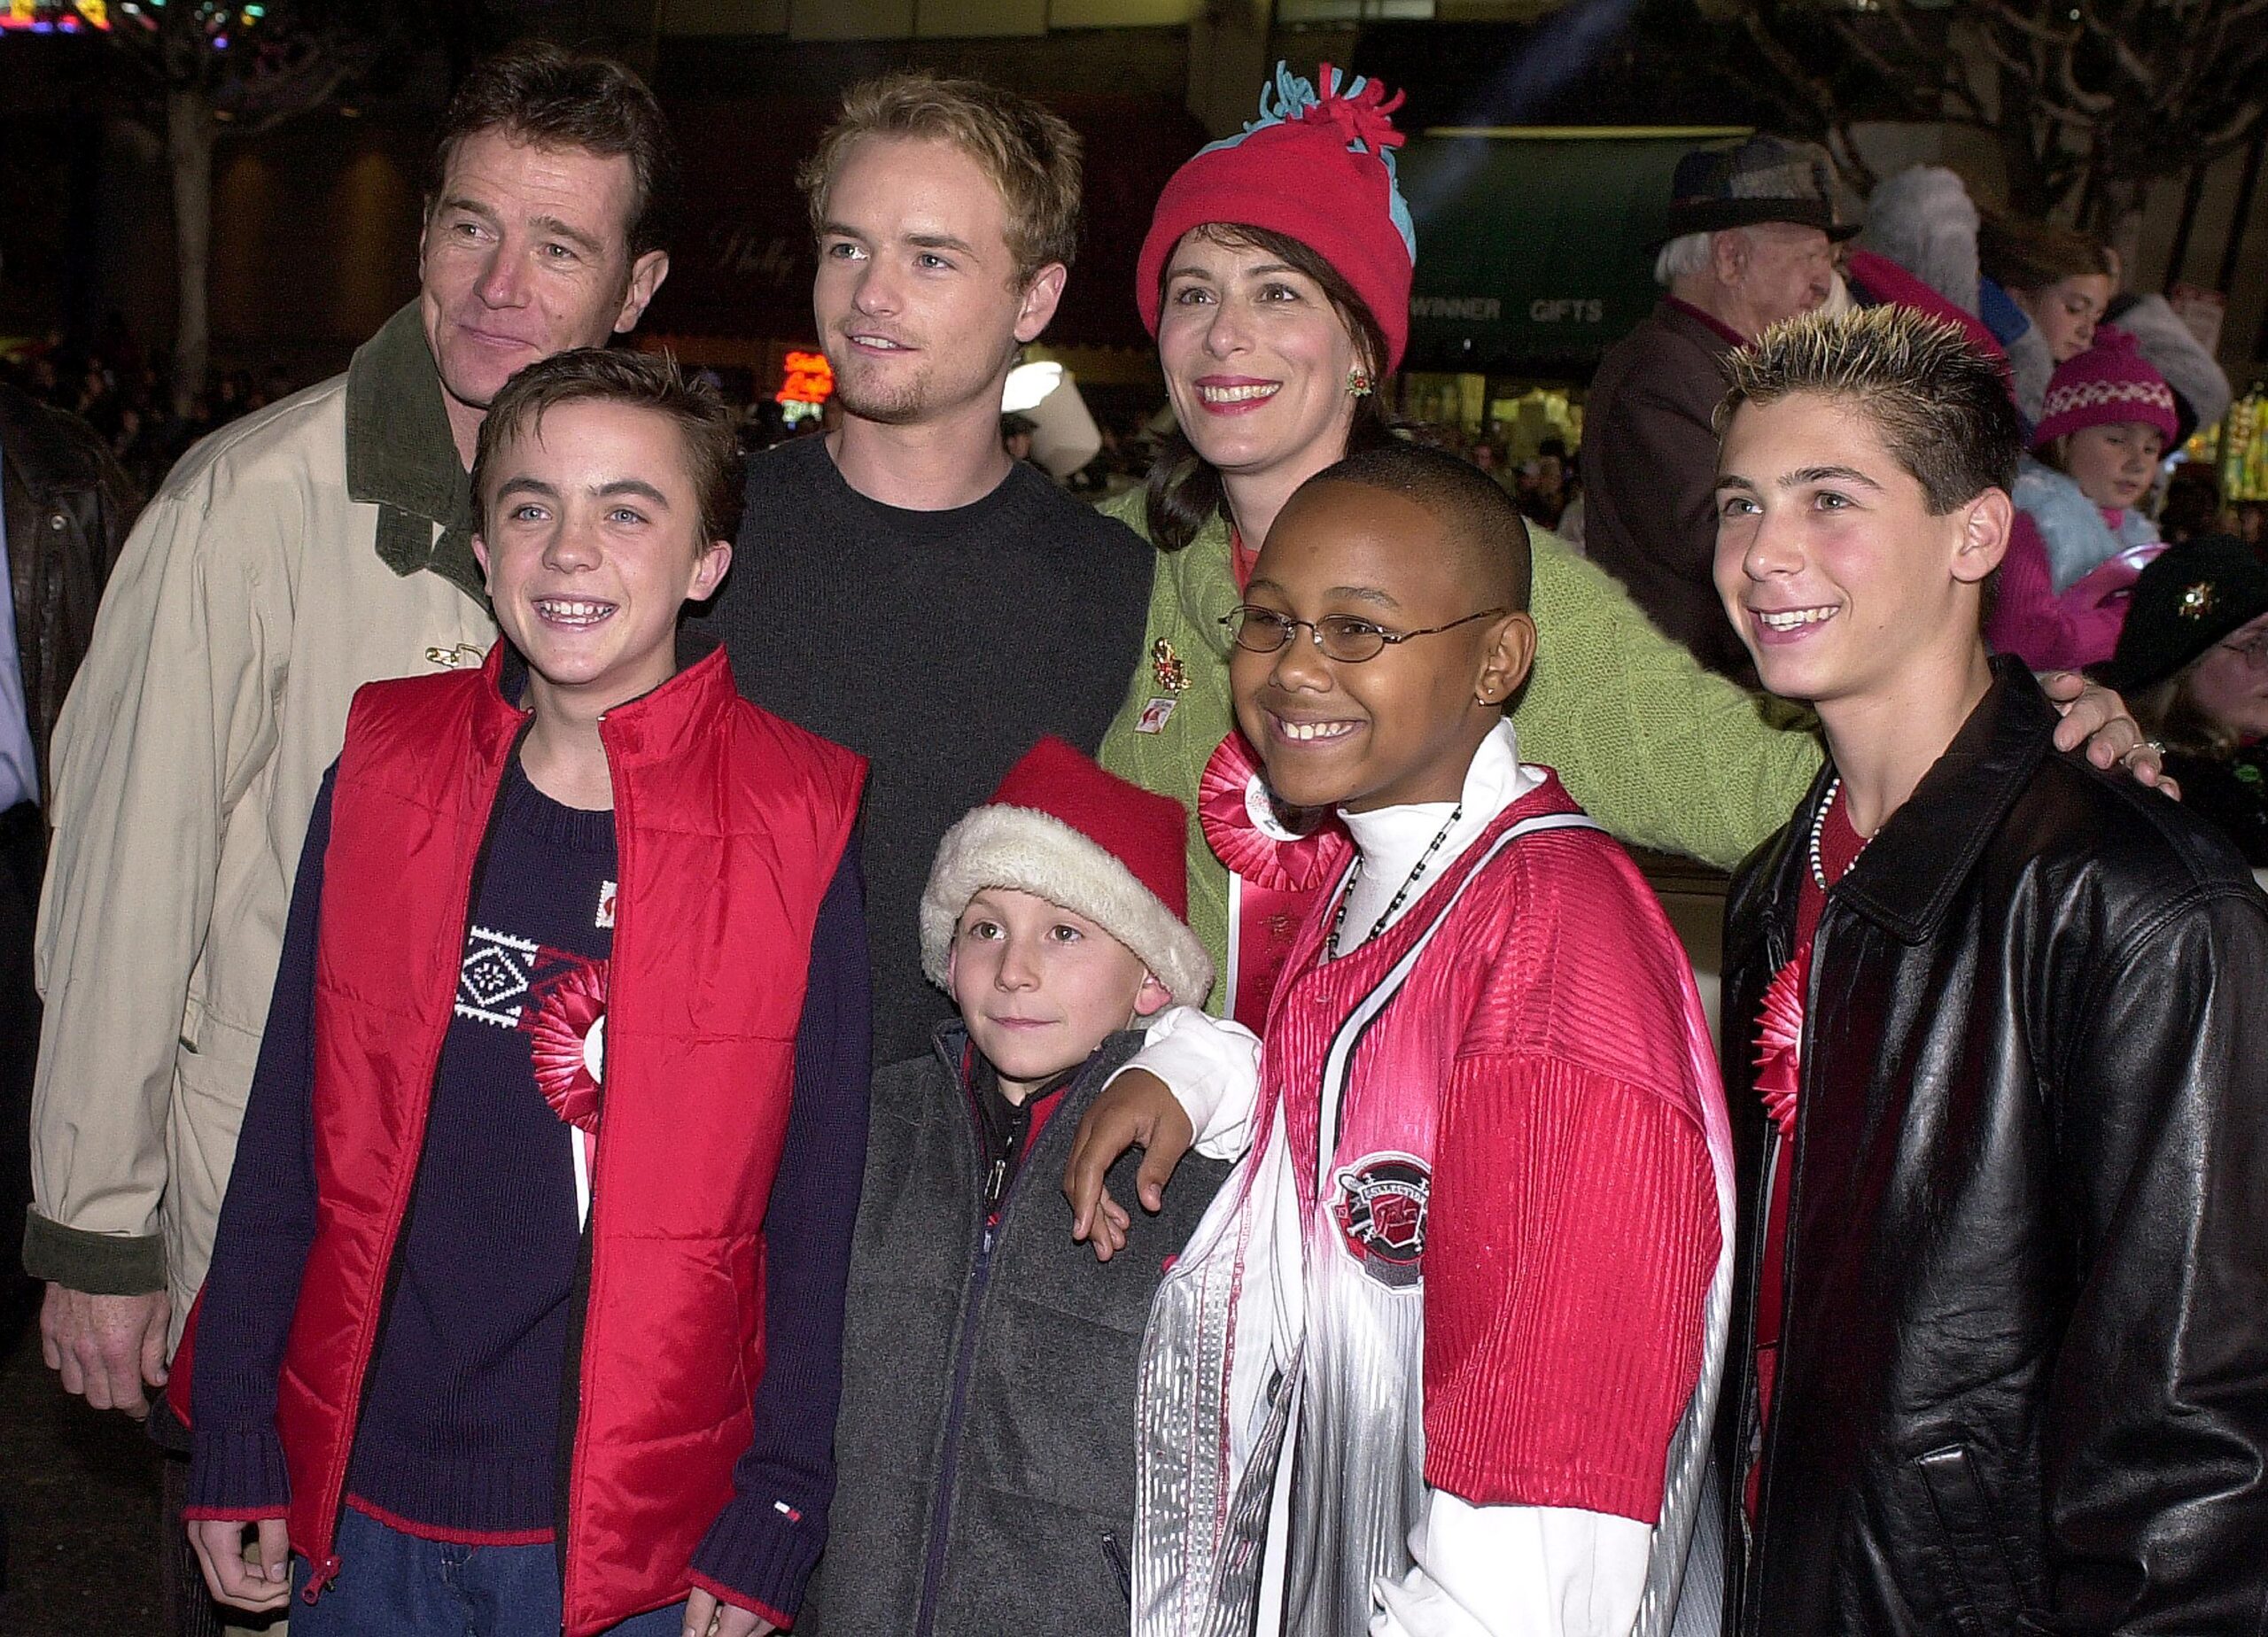 The cast of Malcolm in the Middle poses for a photo November 26, 2000 at the Hollywood Christmas Parade in Hollywood, CA. From left to right, the cast members are Bryan Cranston, Frankie Muniz, Christopher Masterson, Erik Per Sullivan, Jane Kaczmarek, in back, Craig Lamar Traylor, and Justin Berfield. (Photo by Newsmakers)